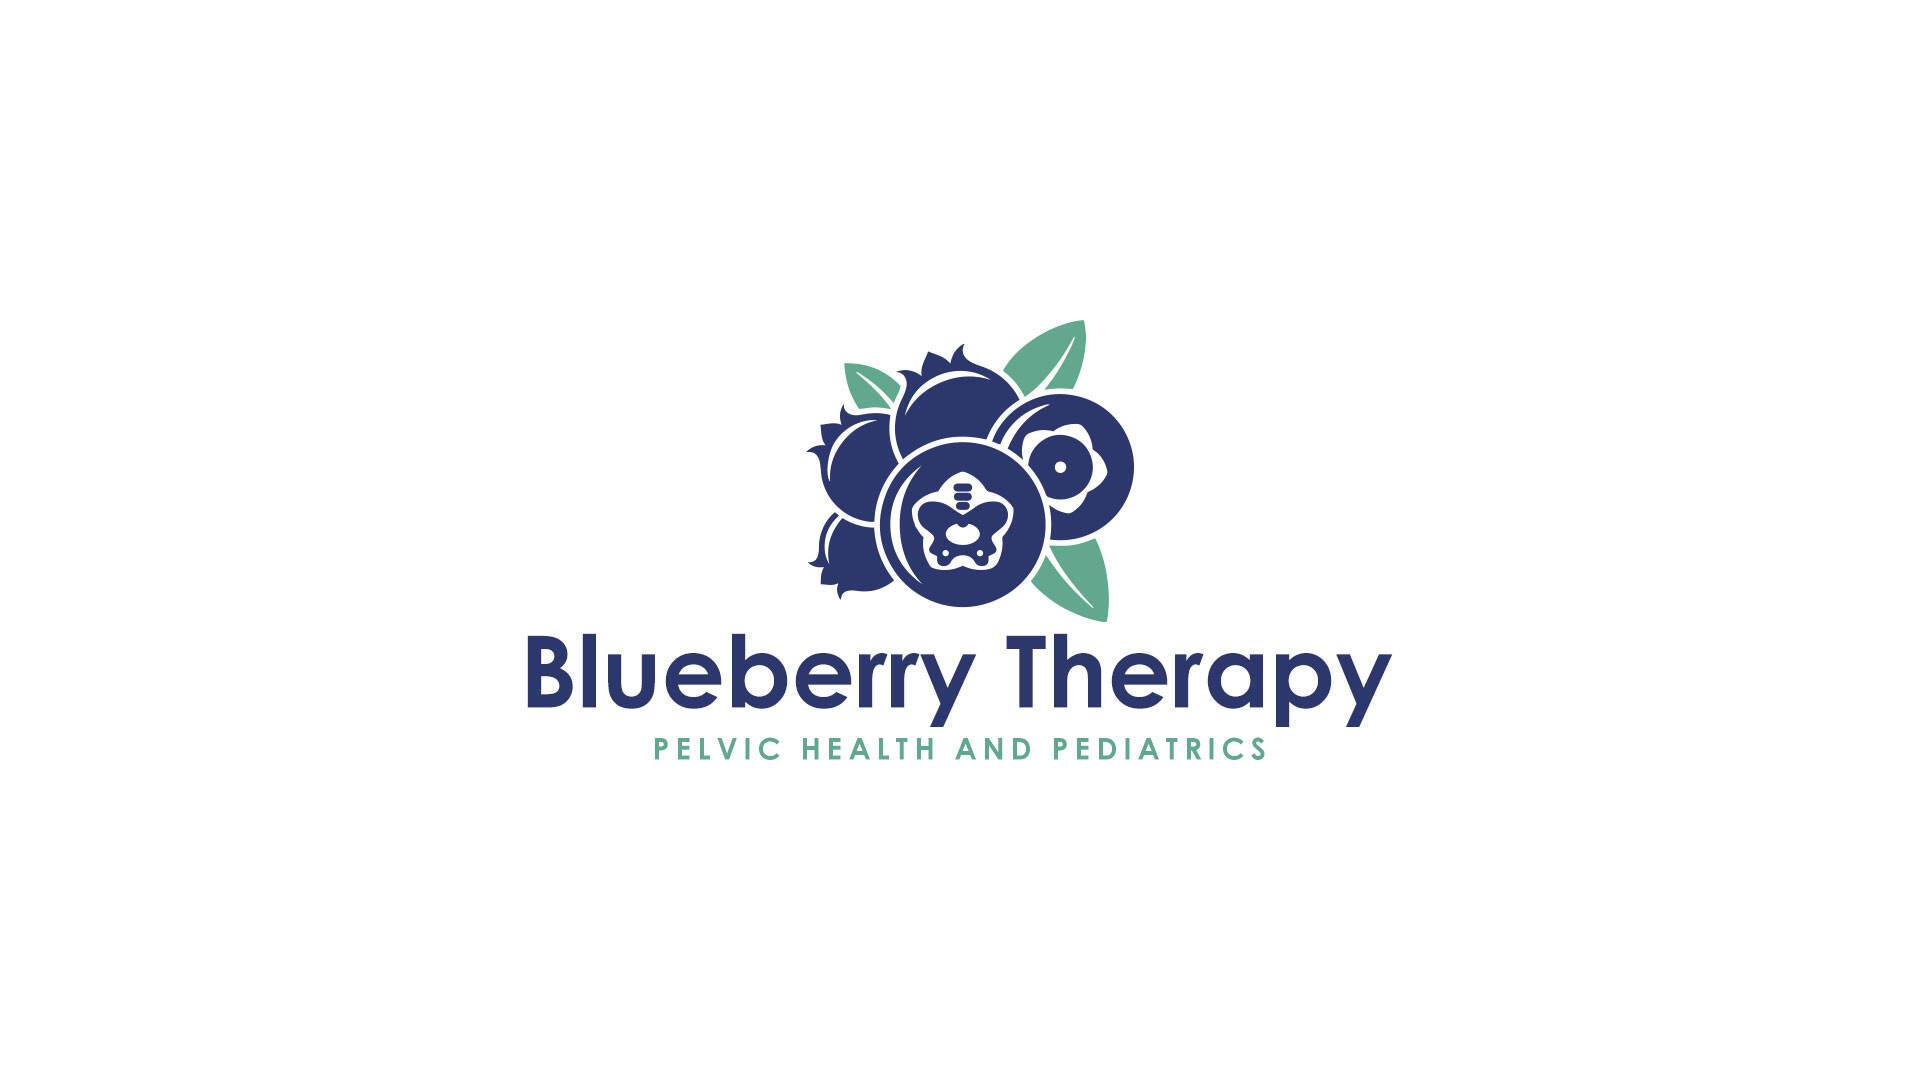 Blueberry Therapy